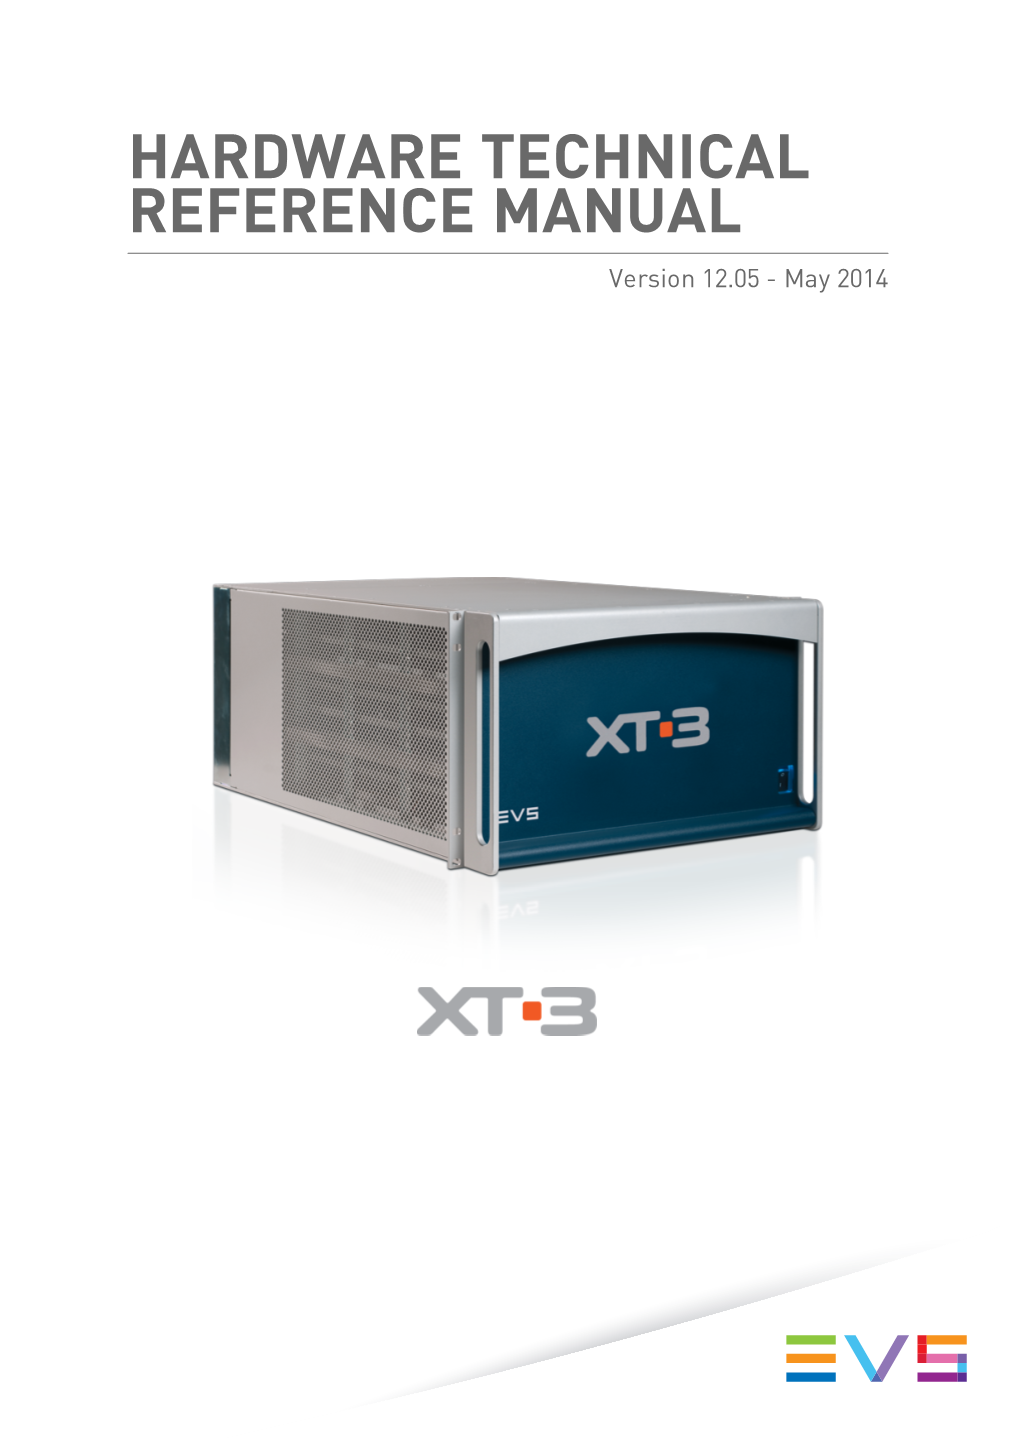 TECHNICAL REFERENCE MANUAL Version 12.05 - May 2014